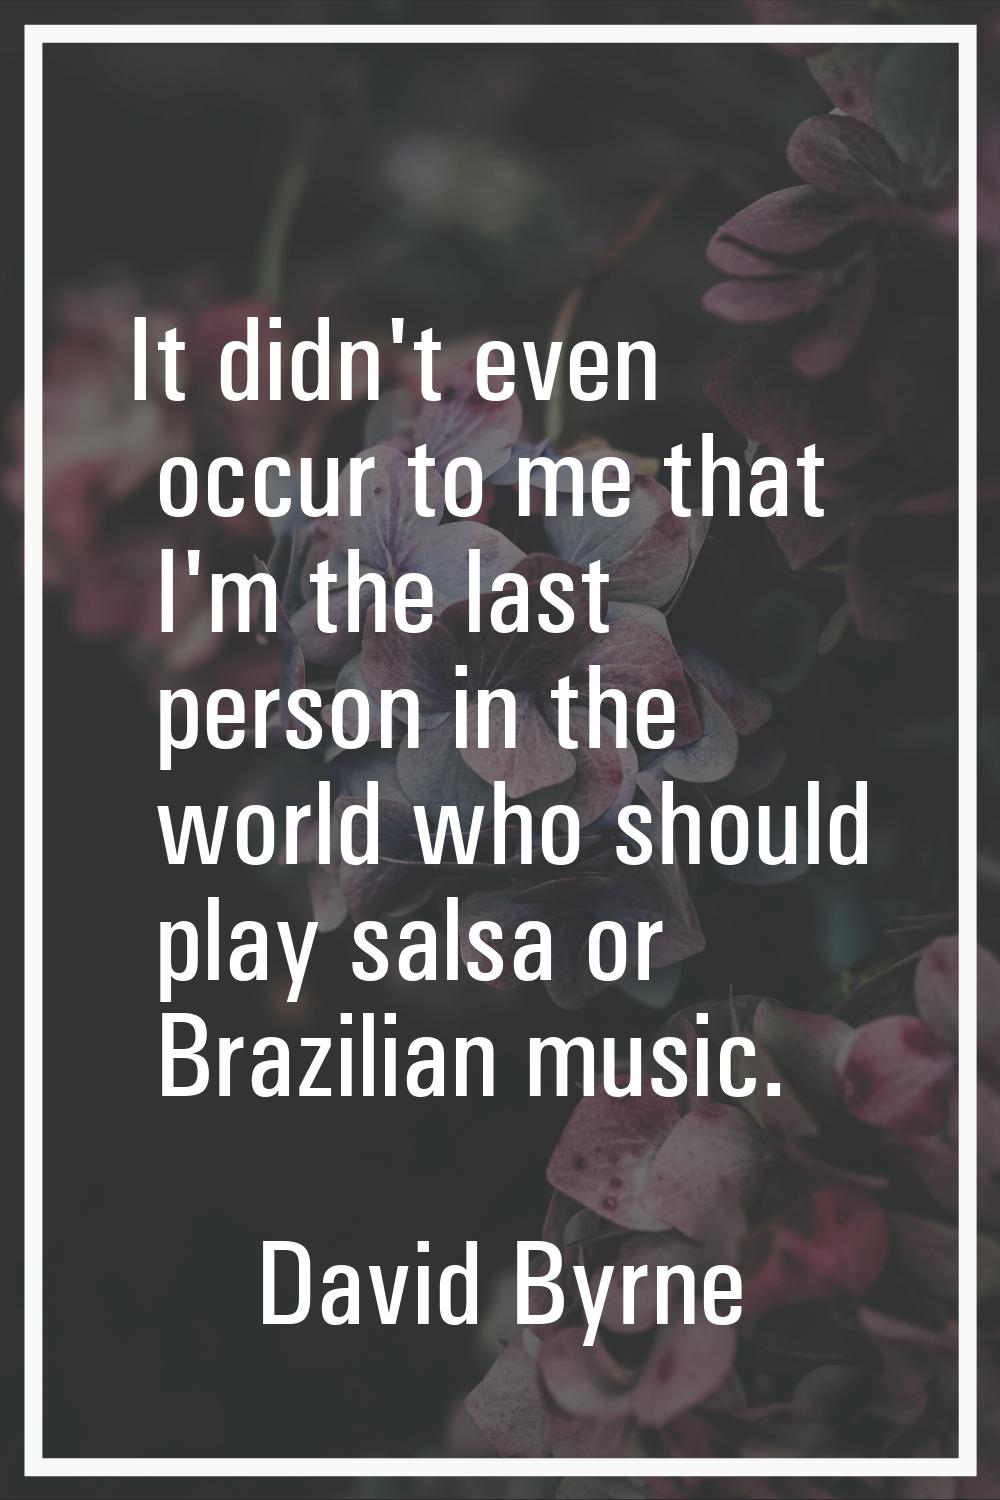 It didn't even occur to me that I'm the last person in the world who should play salsa or Brazilian